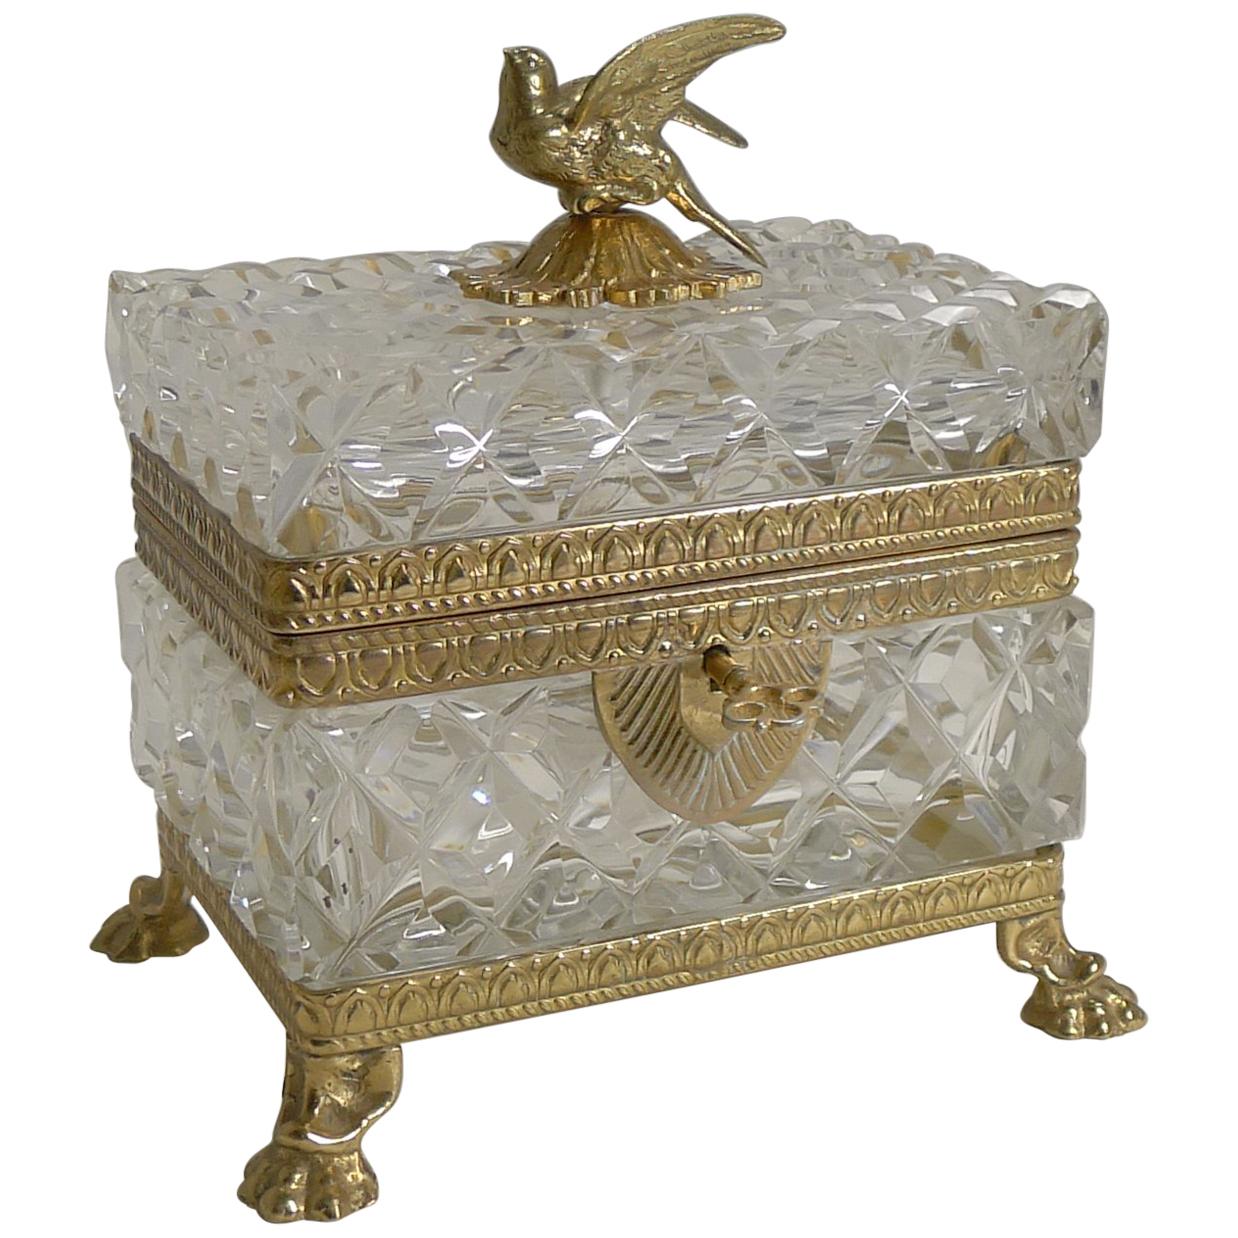 Figural French Cut Crystal and Gilded Bronze Jewelry Casket or Box, circa 1900